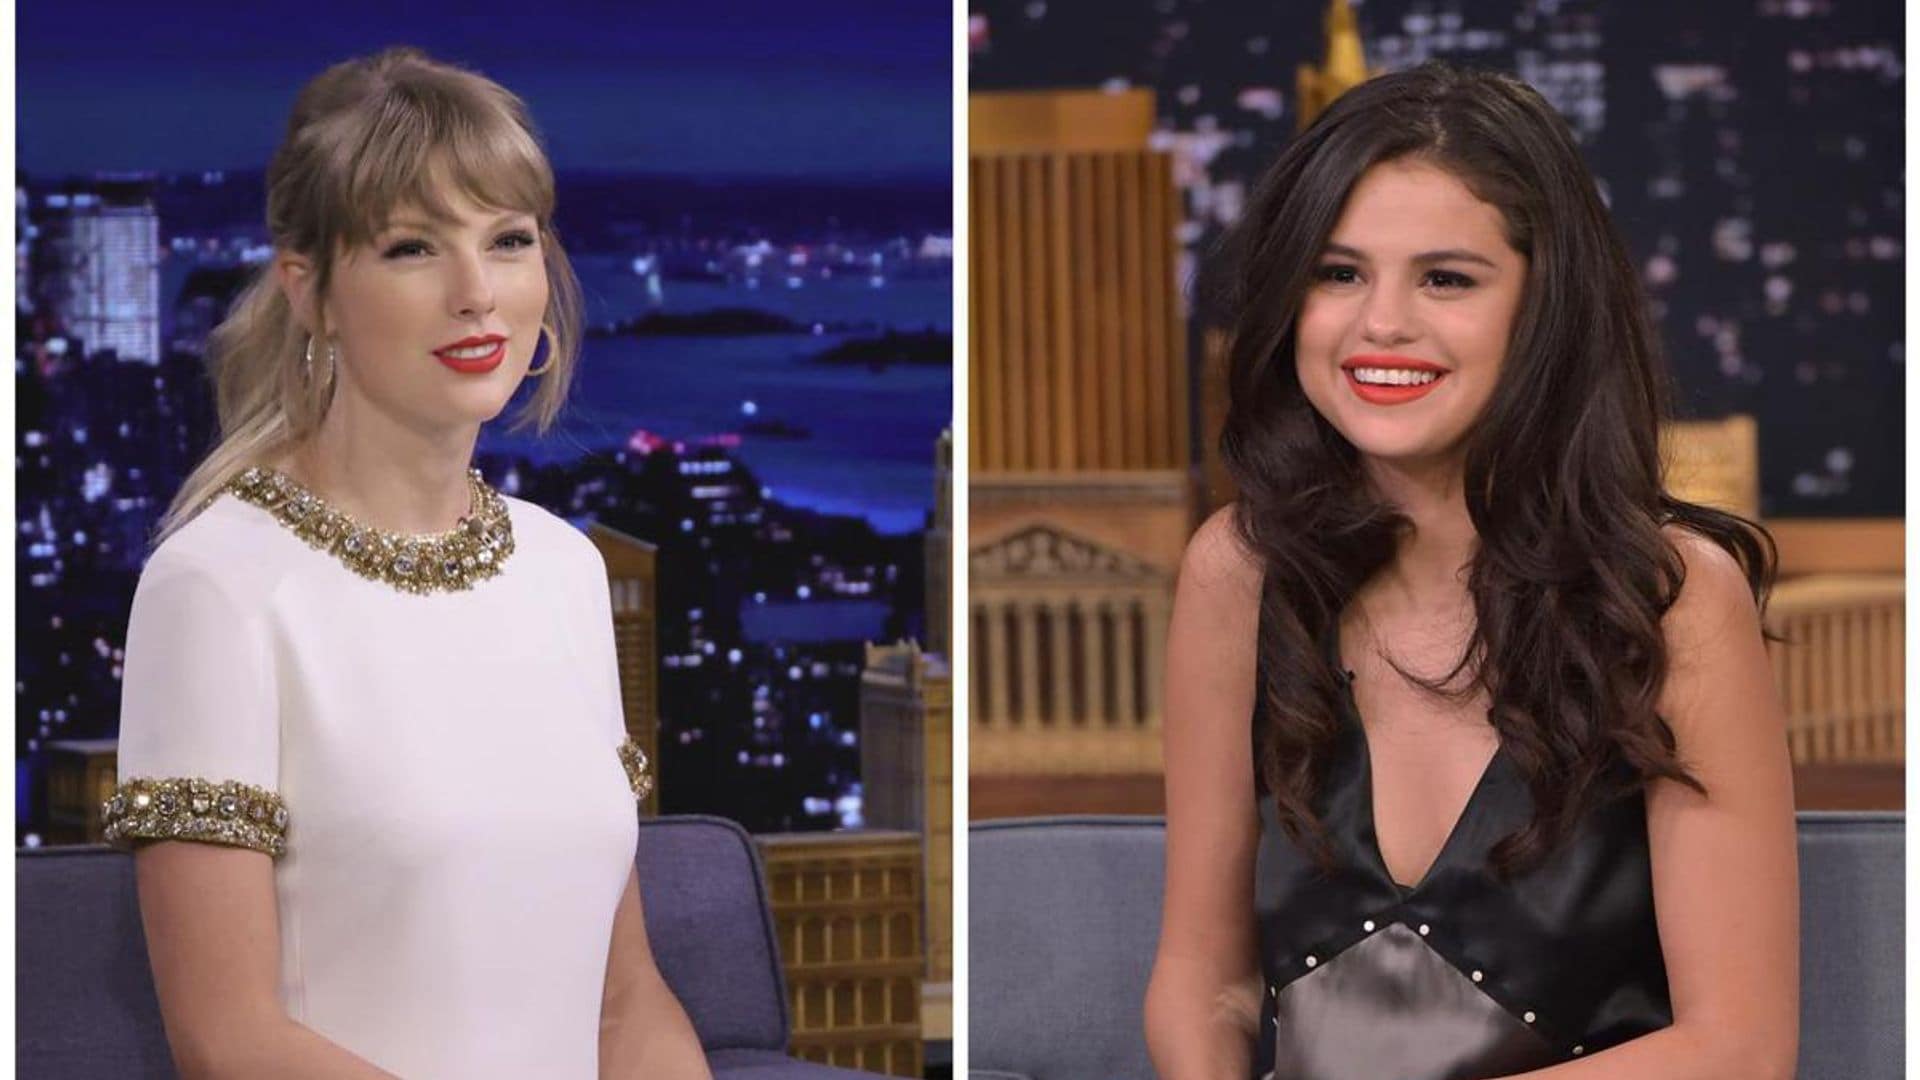 Taylor Swift and Selena Gomez are set to appear on ‘The Tonight Show Starring Jimmy Fallon’